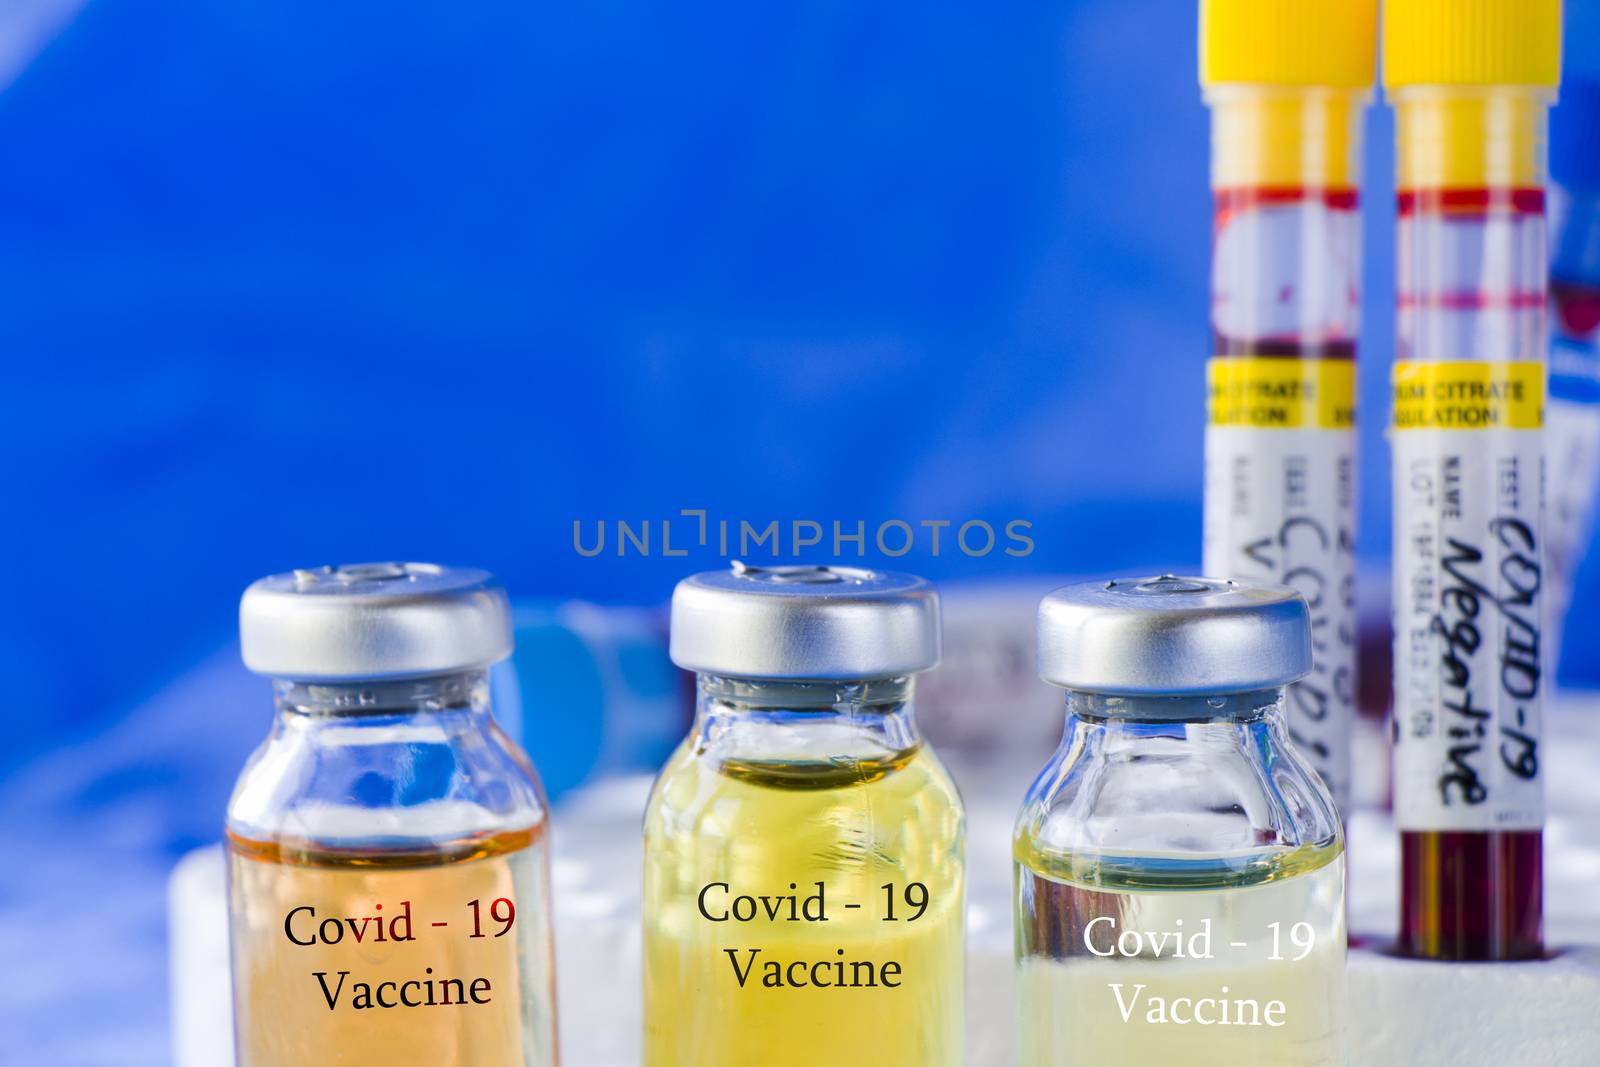 Corona virus and Covid - 19 new vaccine in ampules and blood tube, variations of vaccine by Taidundua